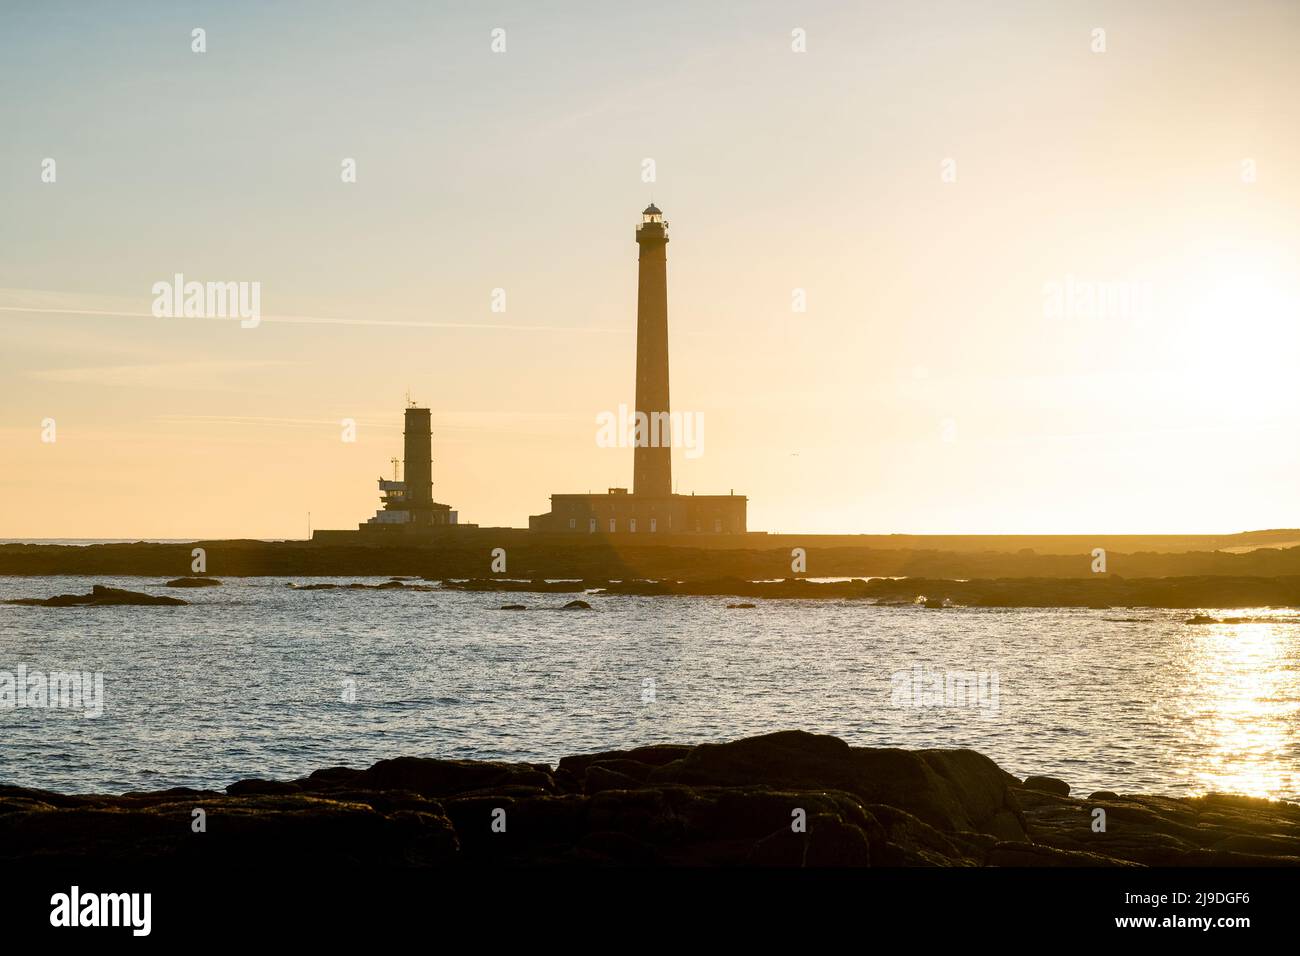 The gatteville lighthouse in Normandy during the sunrise Stock Photo